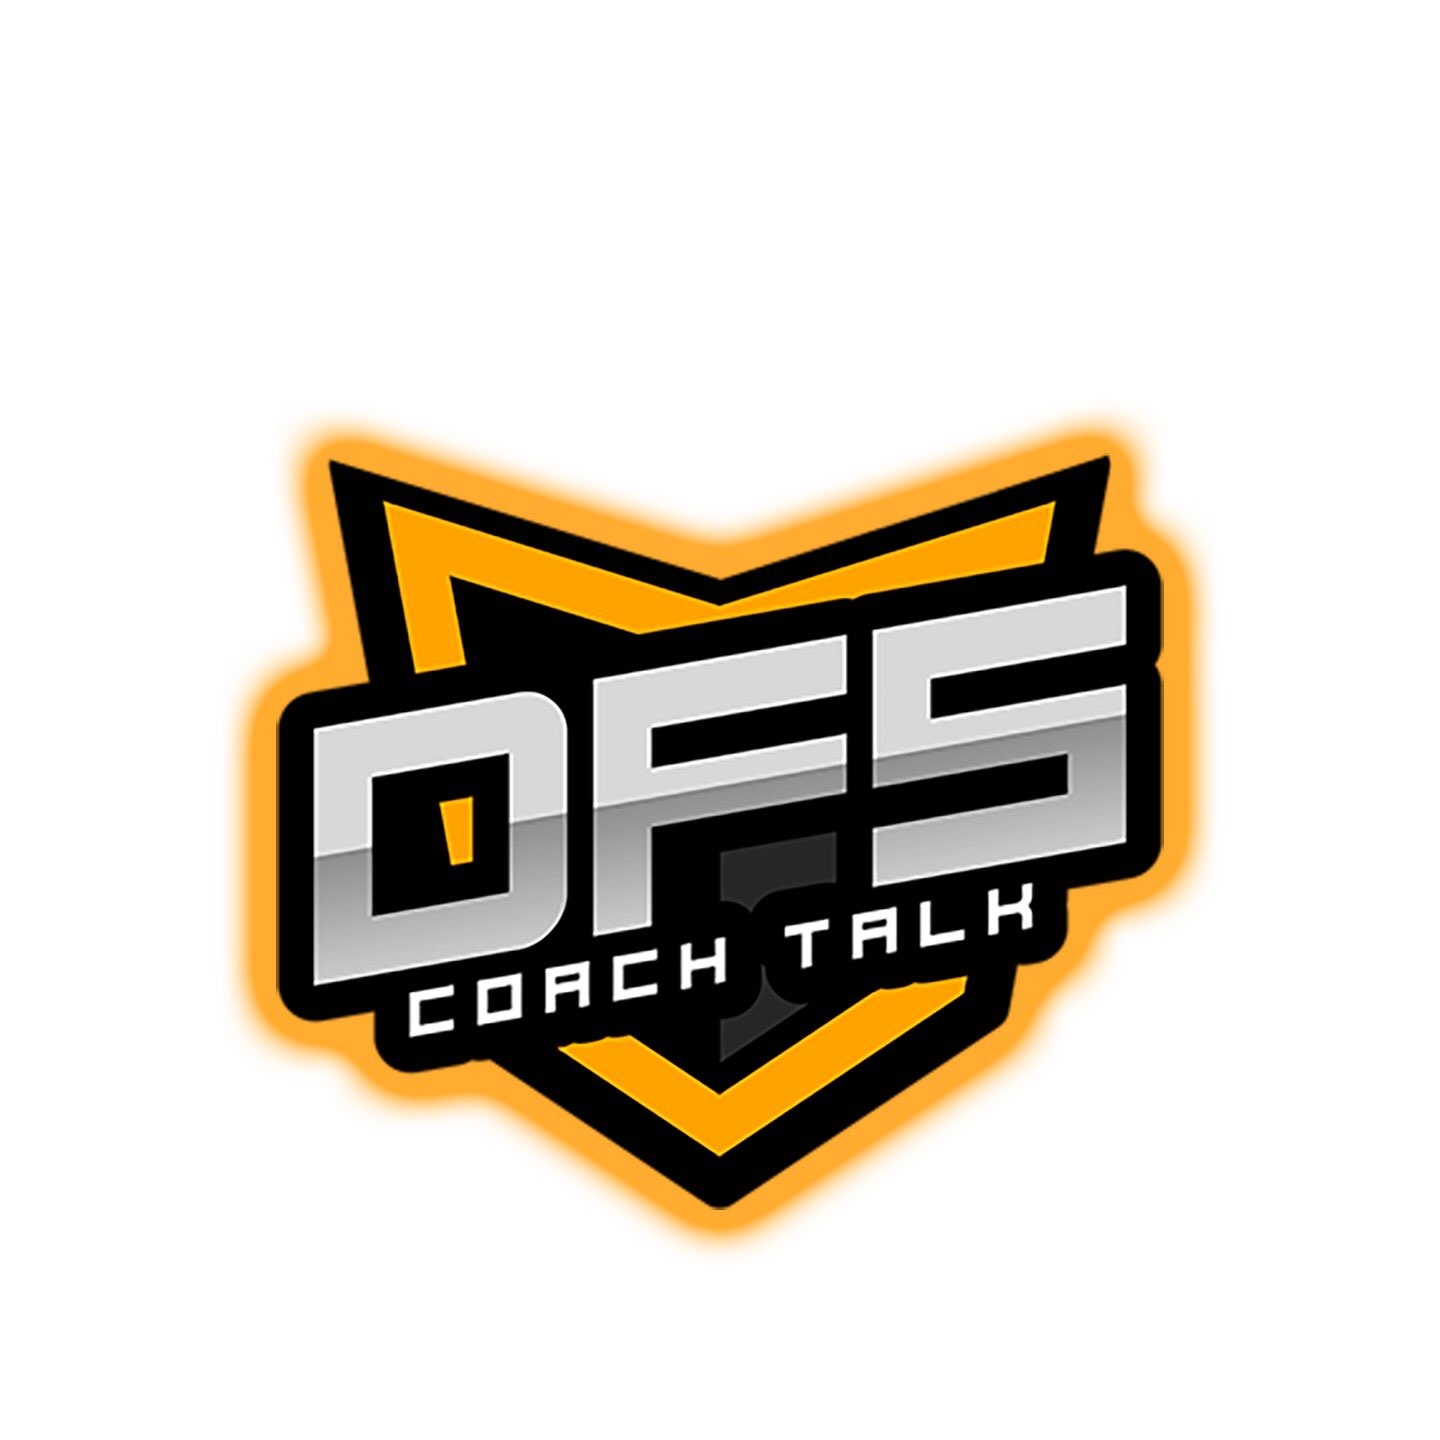 NFL WEEK 9 SUNDAY TO MONDAY SLATE BREAKDOWN WITH DFS COACH TALK LETS GO!